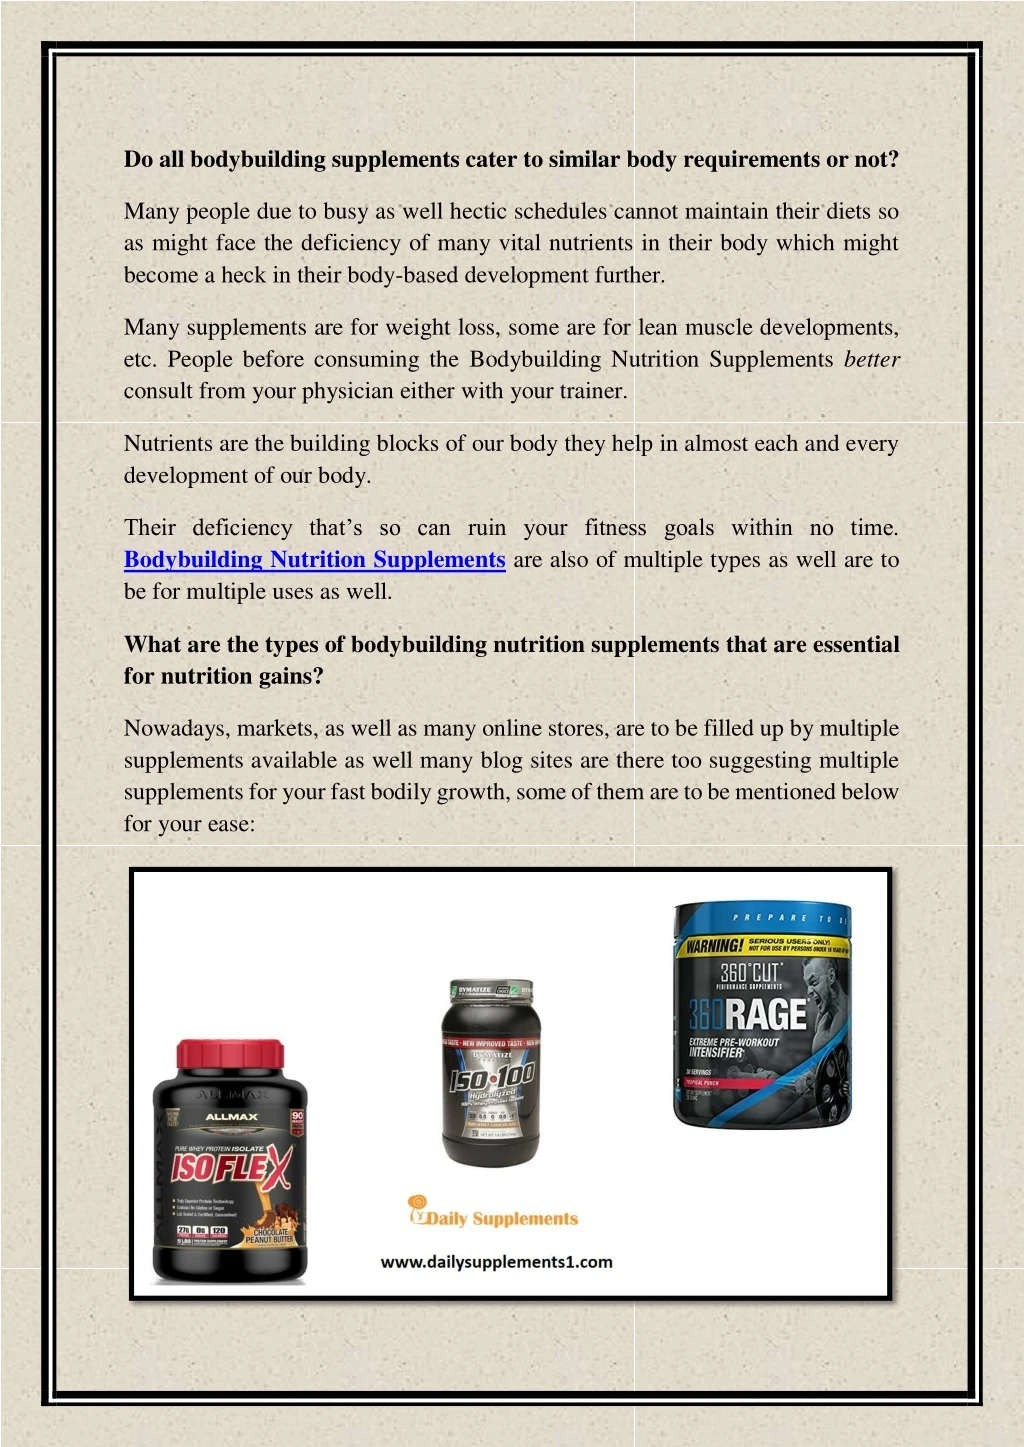 do all bodybuilding supplements cater to similar